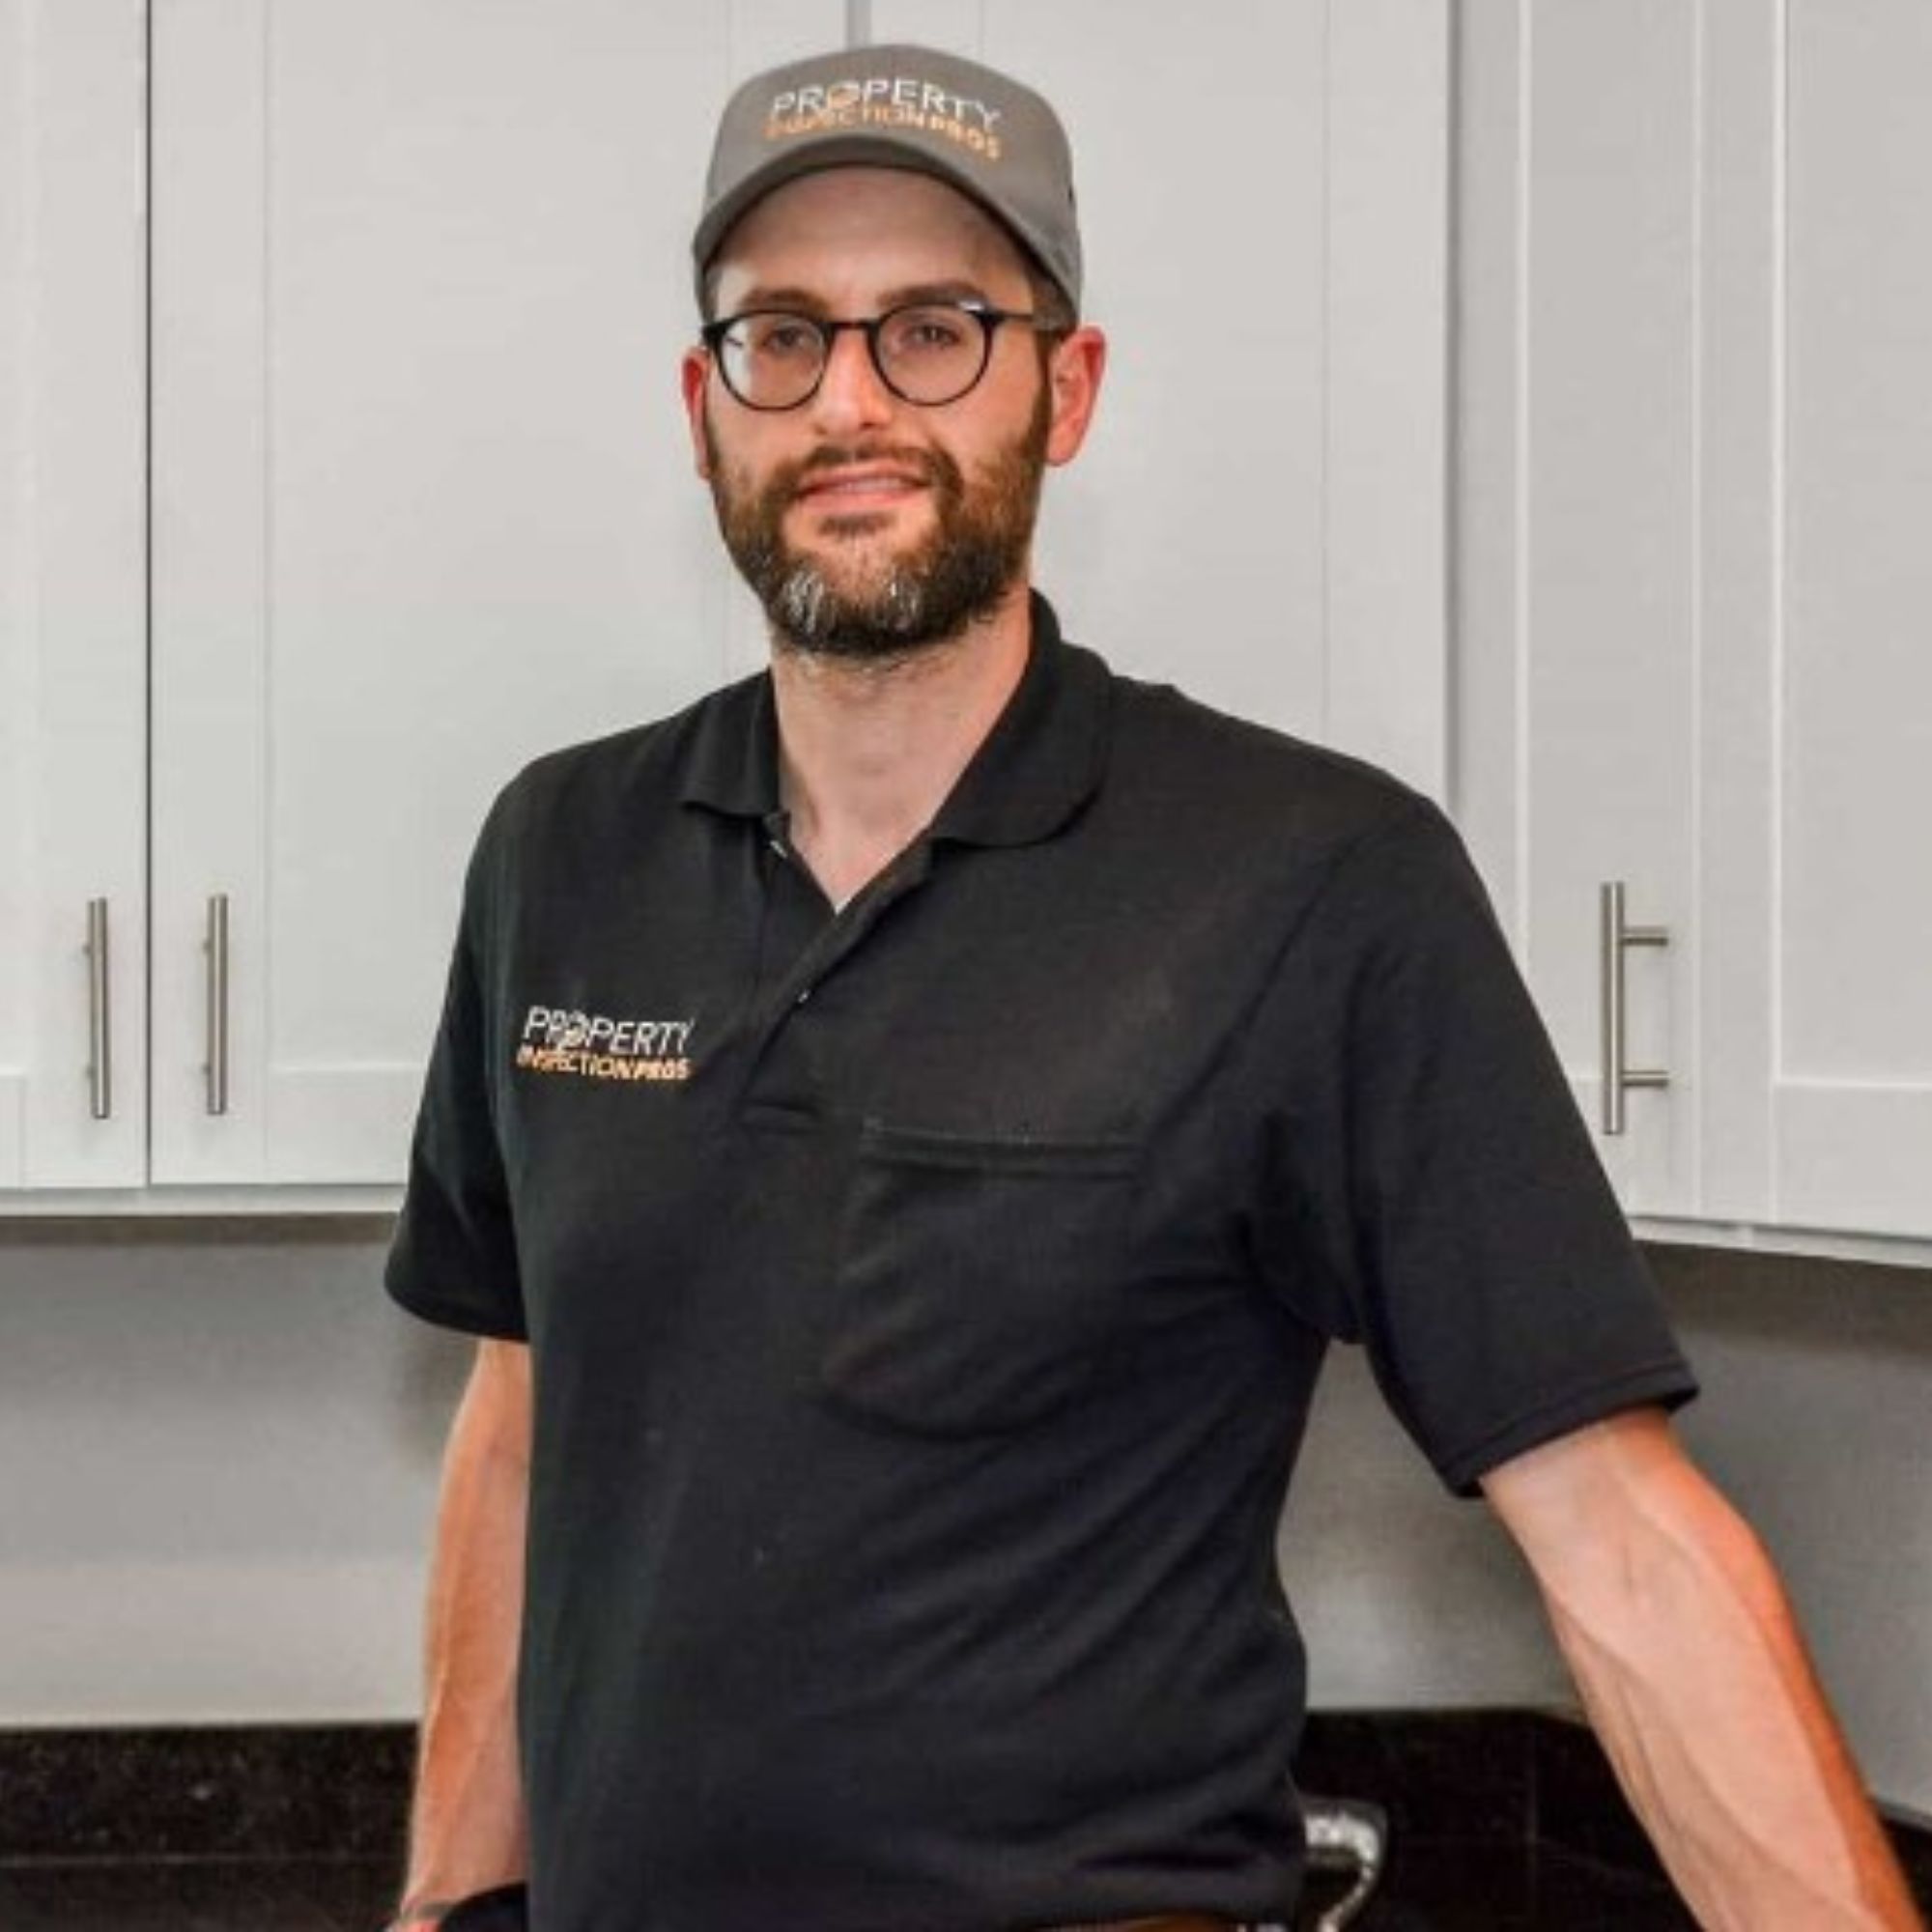 Sol Kruk, a white man in a black shirt, glasses, and cap, standing in a kitchen with white cupboards